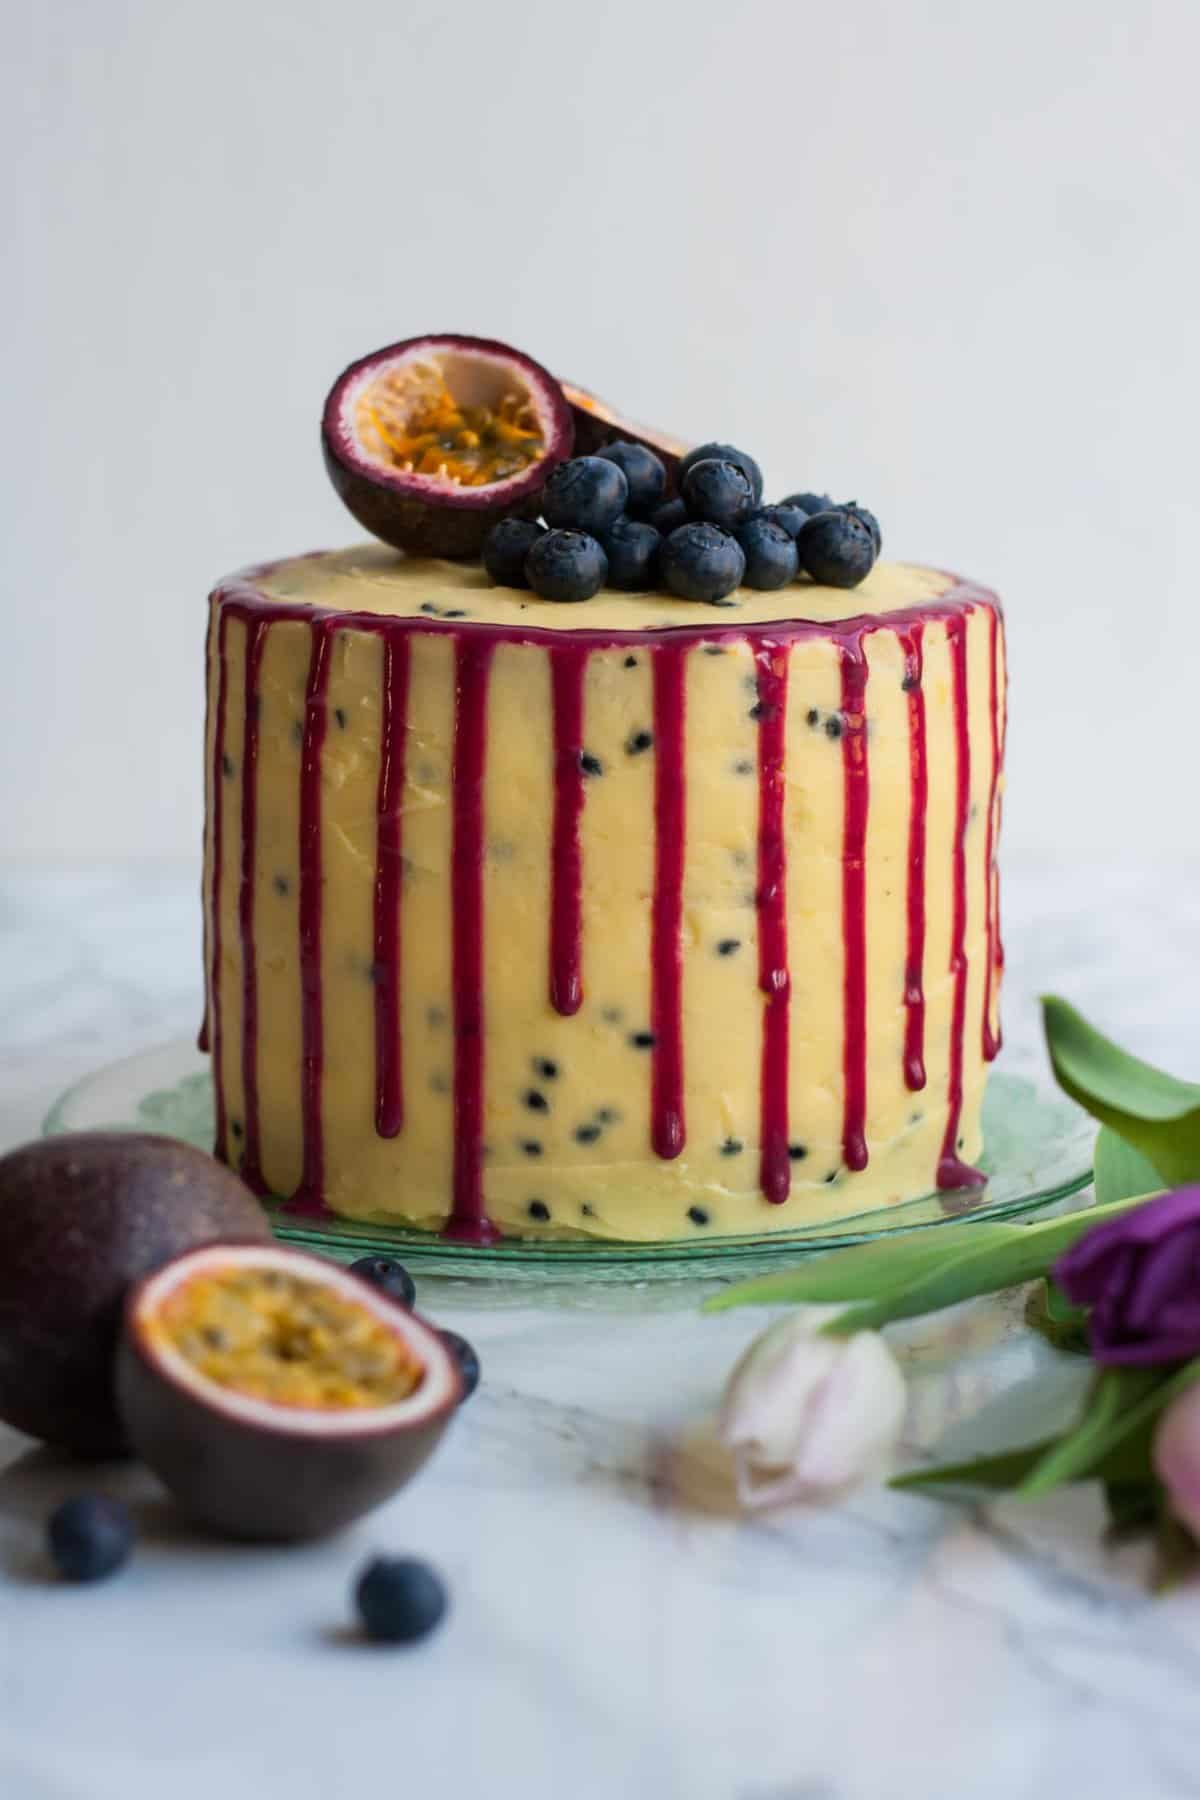 A cake plate with blueberry passionfruit cake with a drizzle down the side. 